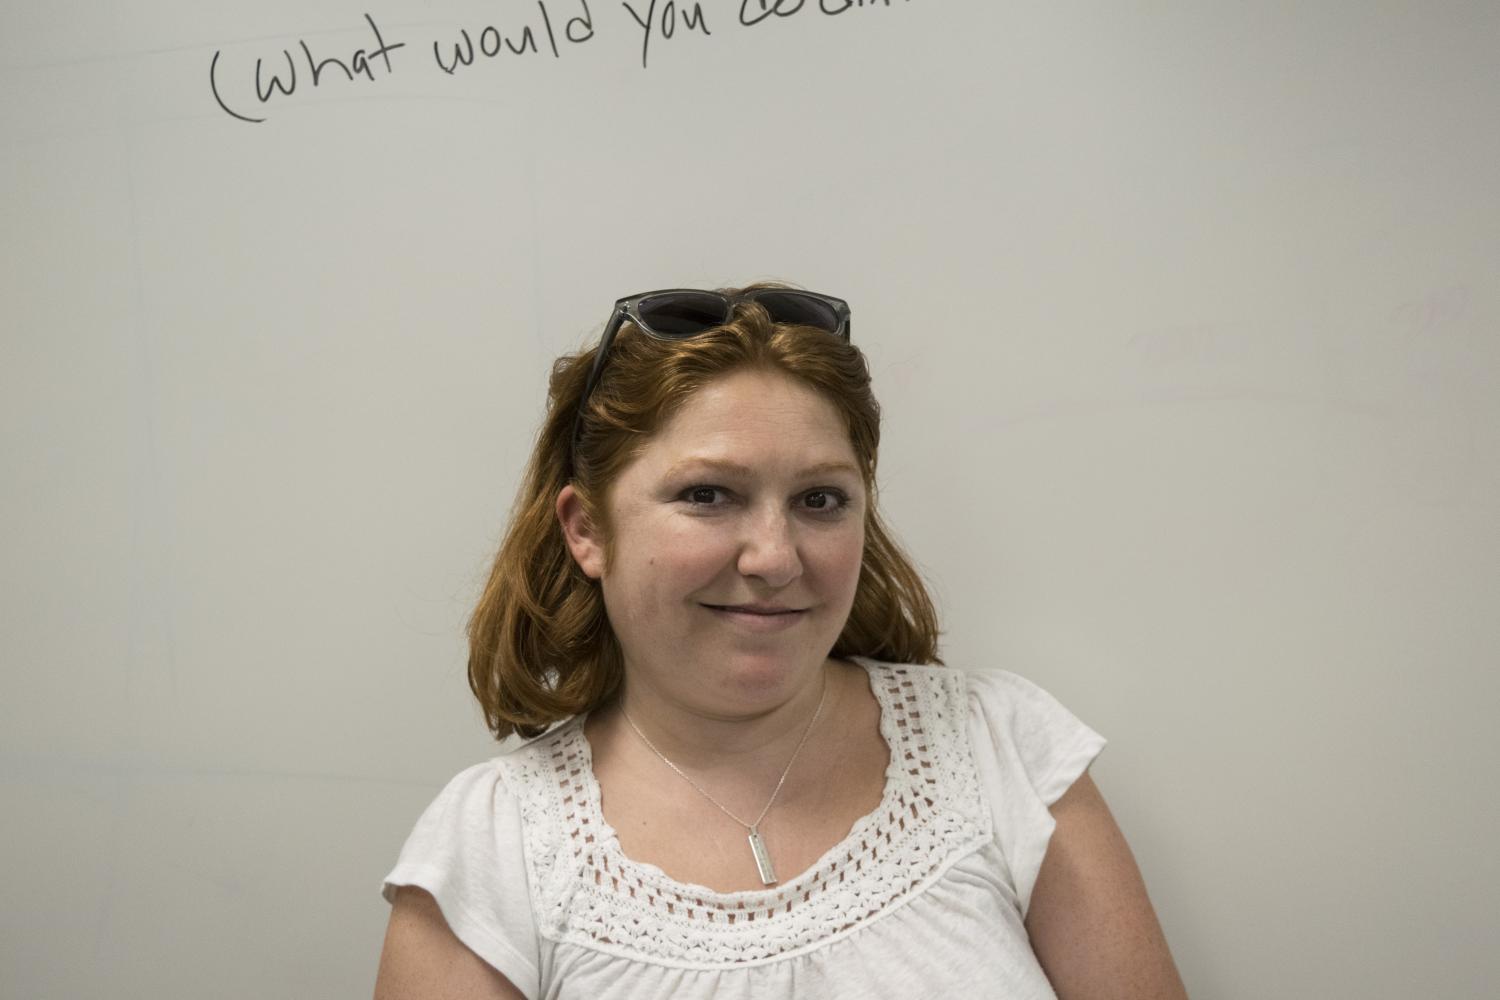 The first day of school becomes the first day of teaching at Clark for Natasha Krupnak. 